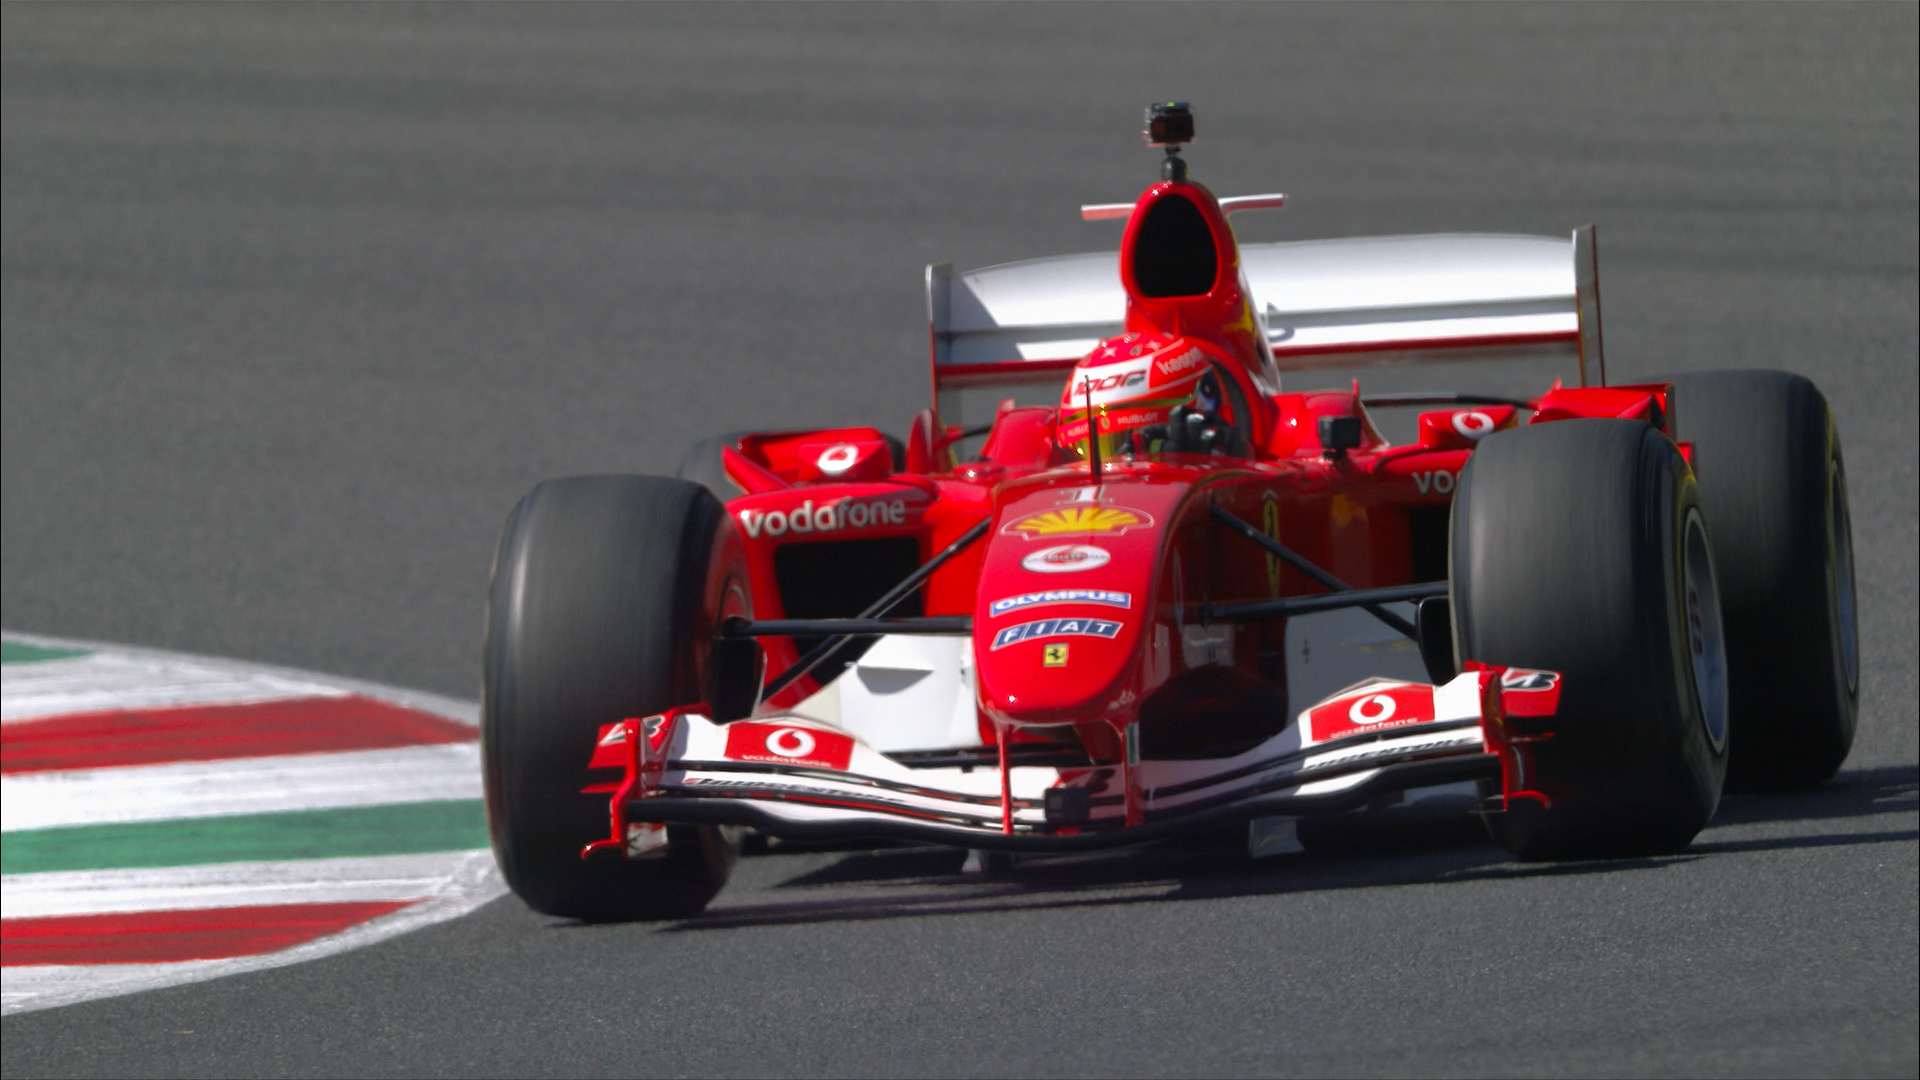 MUST-SEE: Mick Schumacher drives his father’s F2004 ahead of Ferrari’s ...